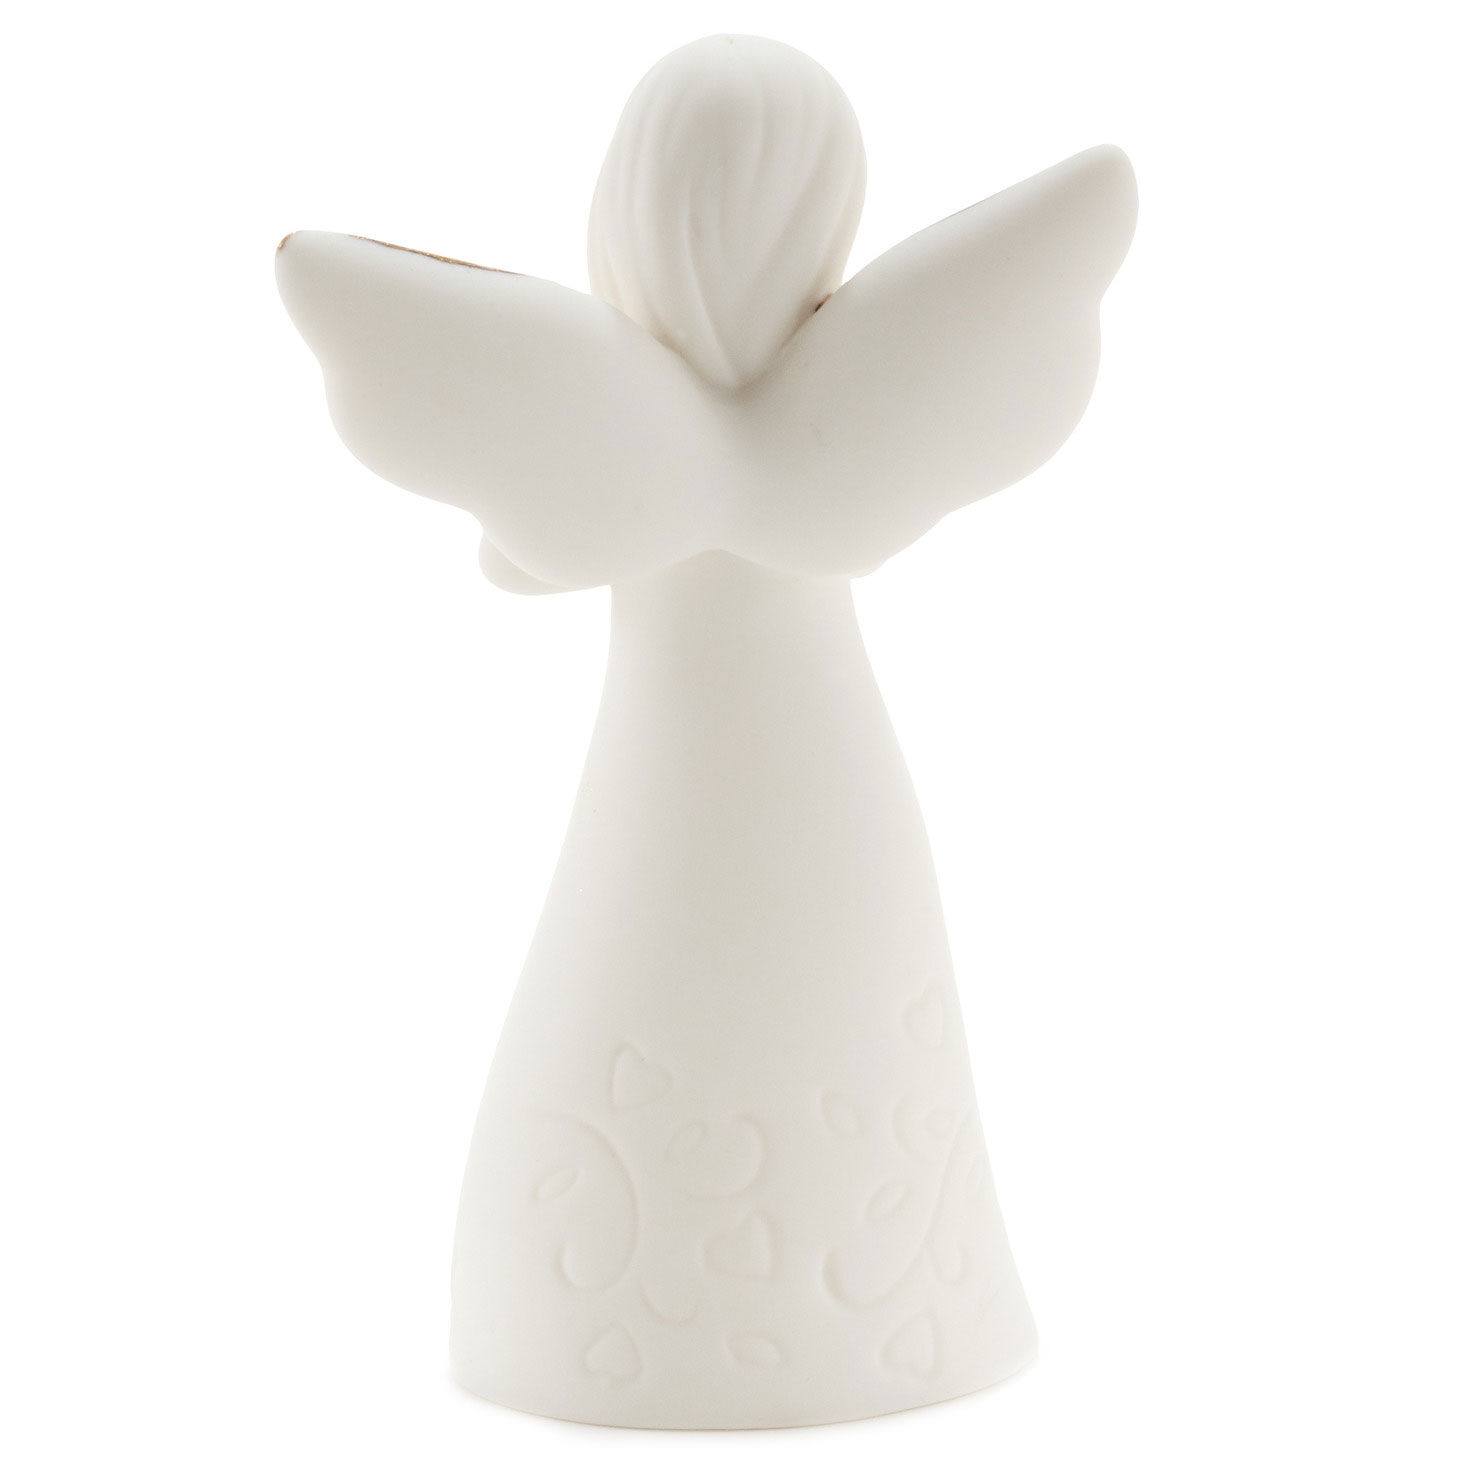 An Aunt's Blessings Mini Angel Figurine, 3.8" for only USD 16.99 | Hallmark